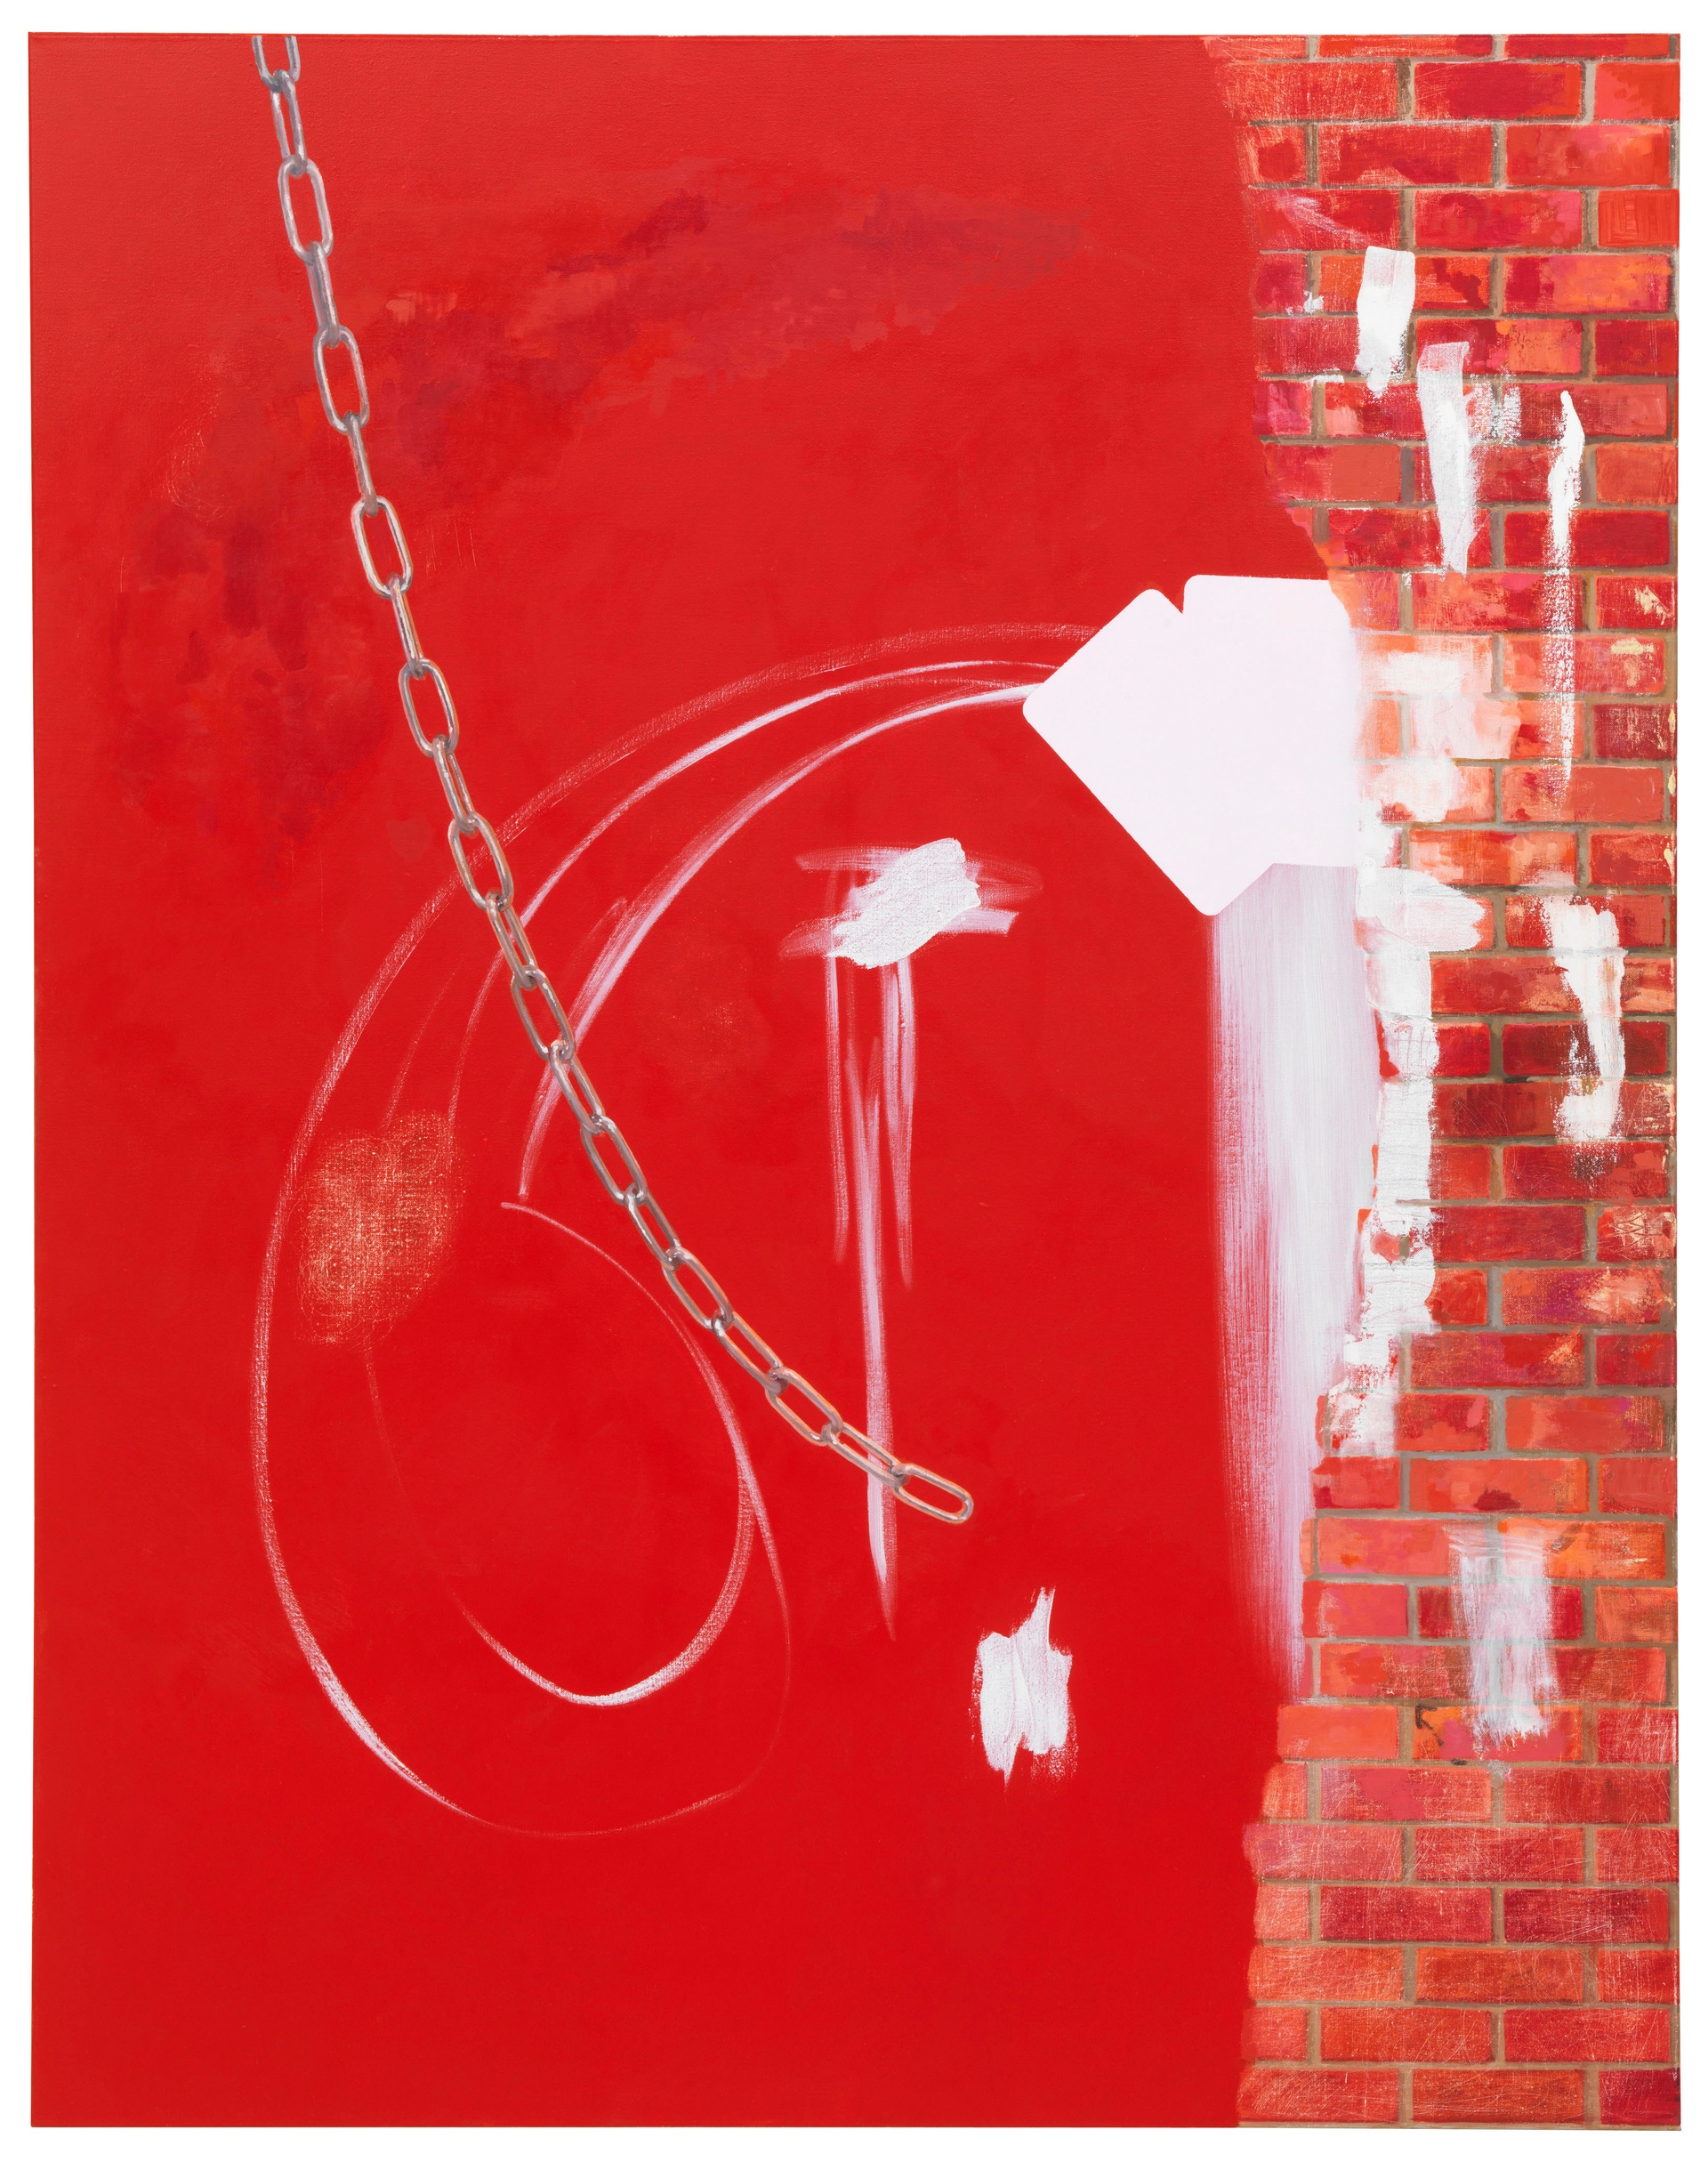 rote Wand, 2011oil on canvas180 x 140 cm